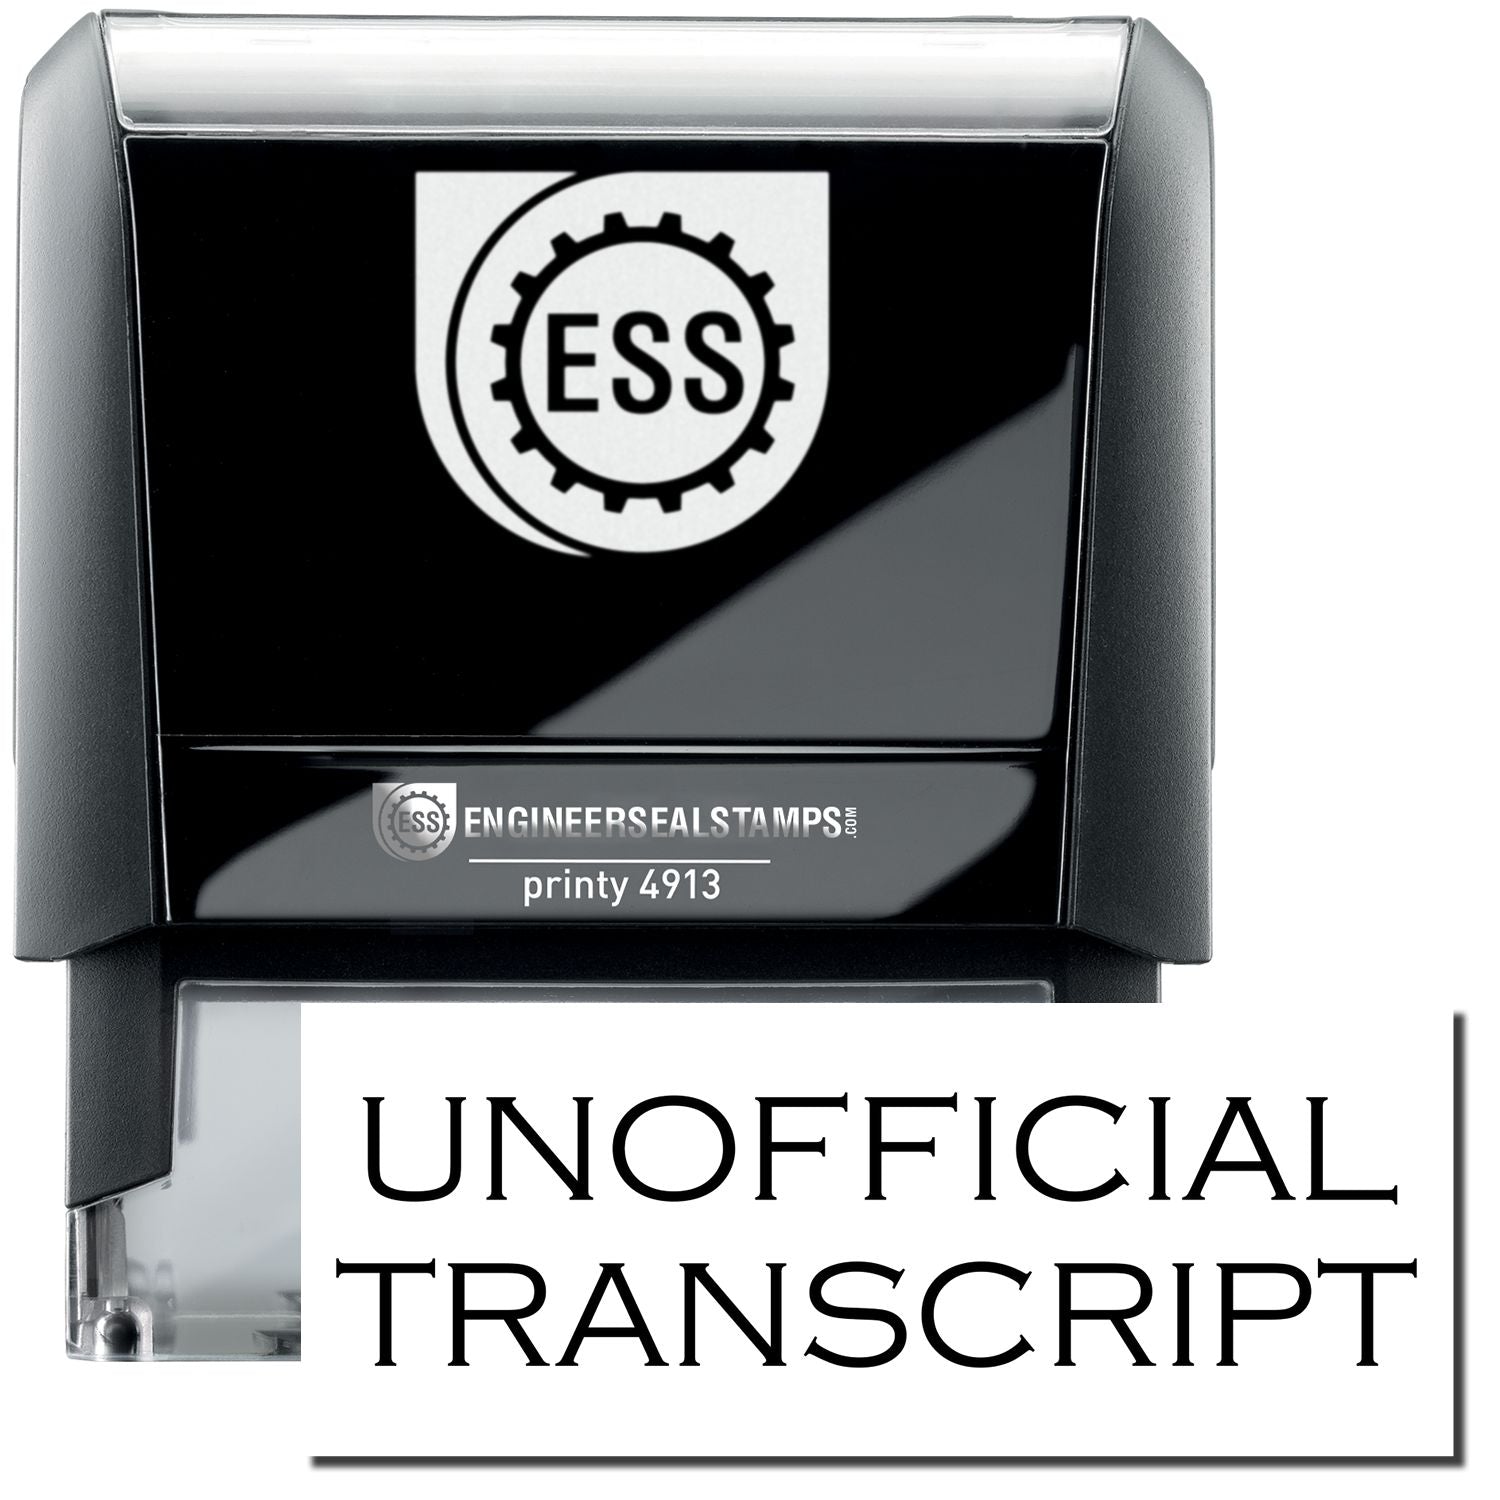 A self-inking stamp with a stamped image showing how the text "UNOFFICIAL TRANSCRIPT" in a large font is displayed by it.